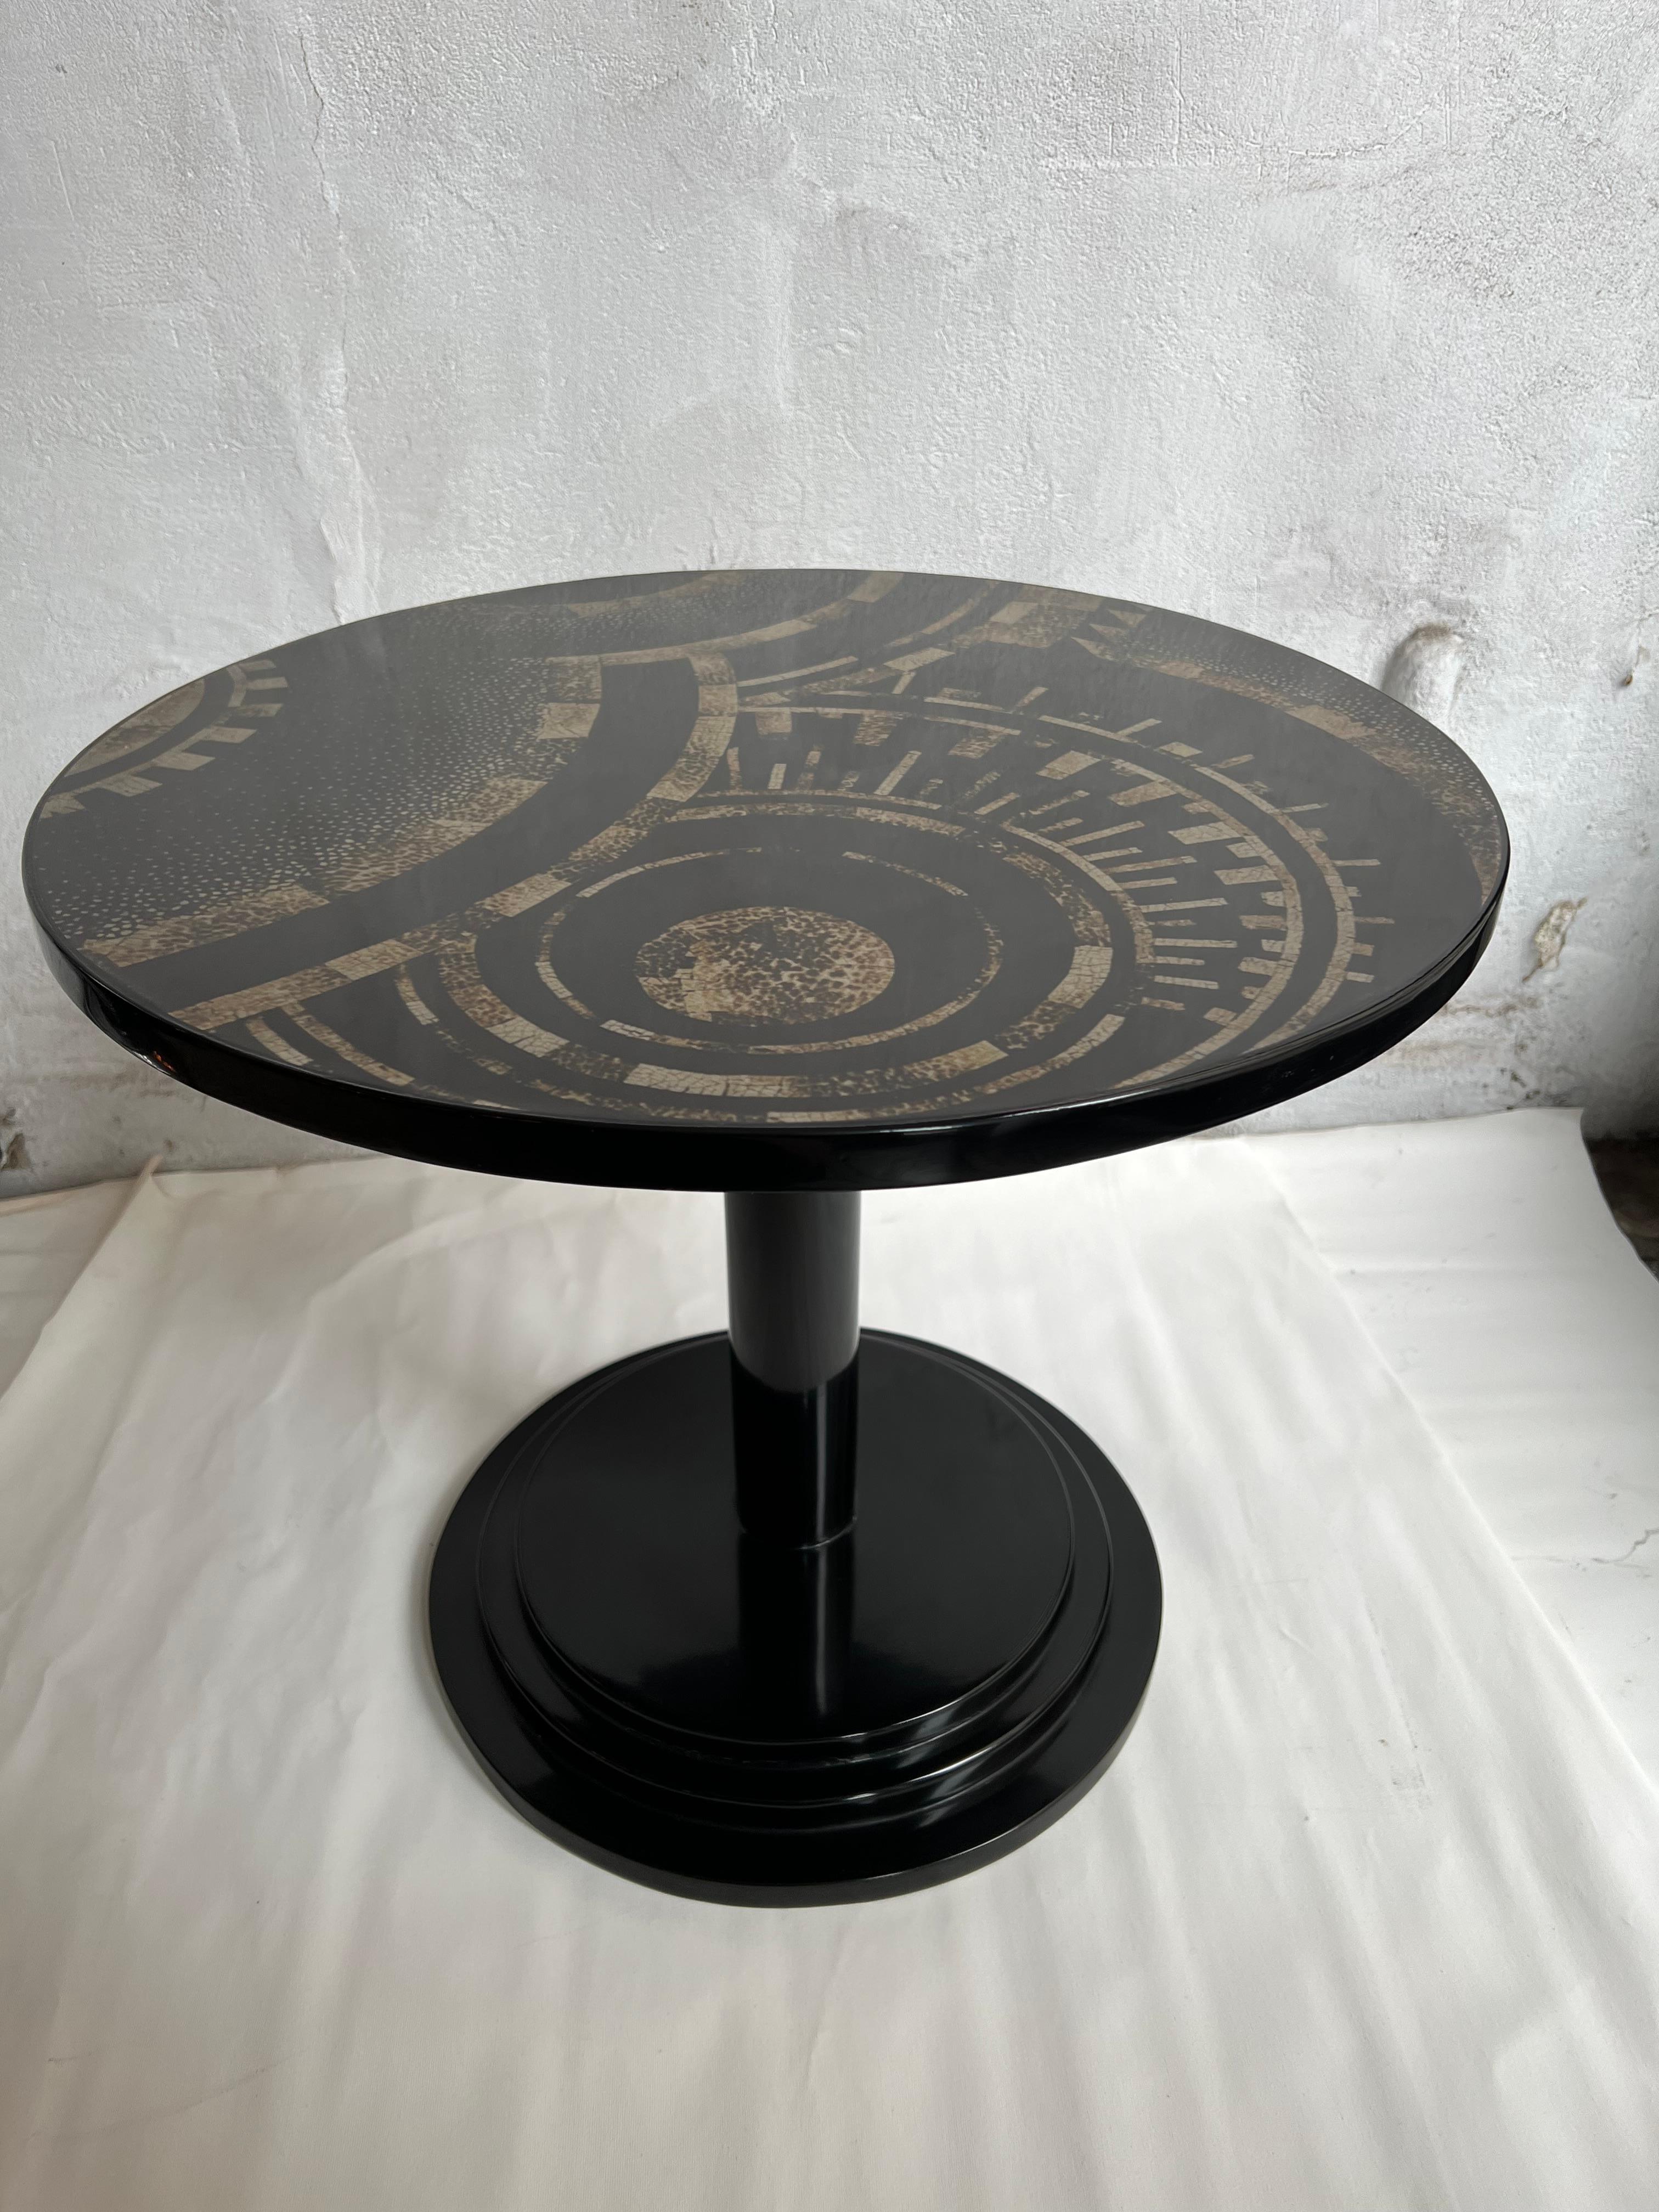 Table

Material: Wood 
Style: Art Deco
France.
We have specialized in the sale of Art Deco and Art Nouveau styles since 1982.If you have any questions we are at your disposal.
Pushing the button that reads 'View All From Seller'. And you can see